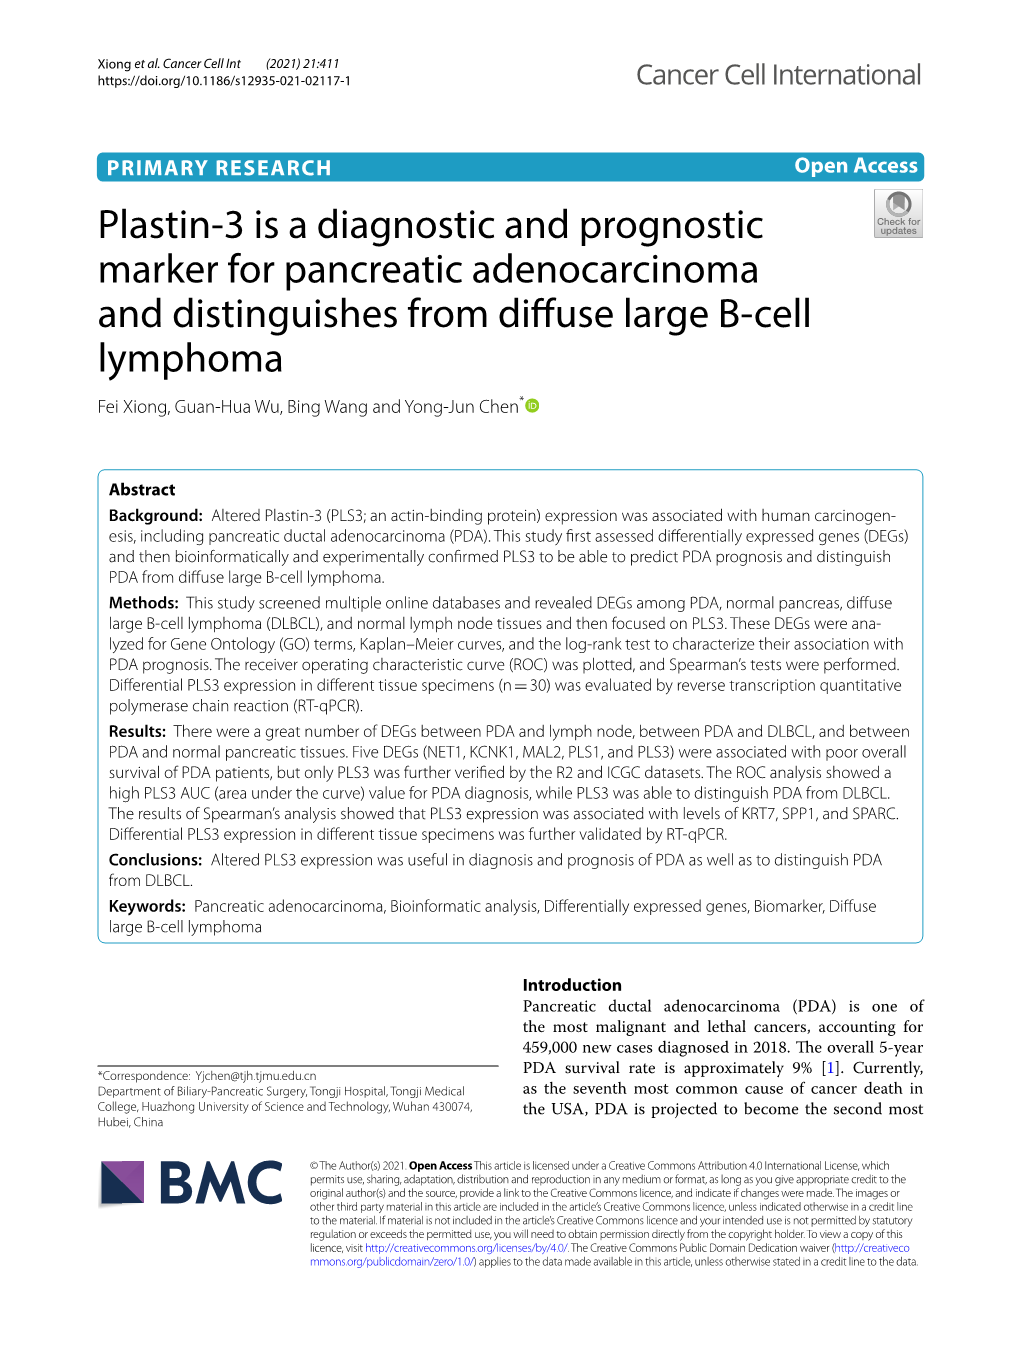 Plastin-3 Is a Diagnostic and Prognostic Marker for Pancreatic